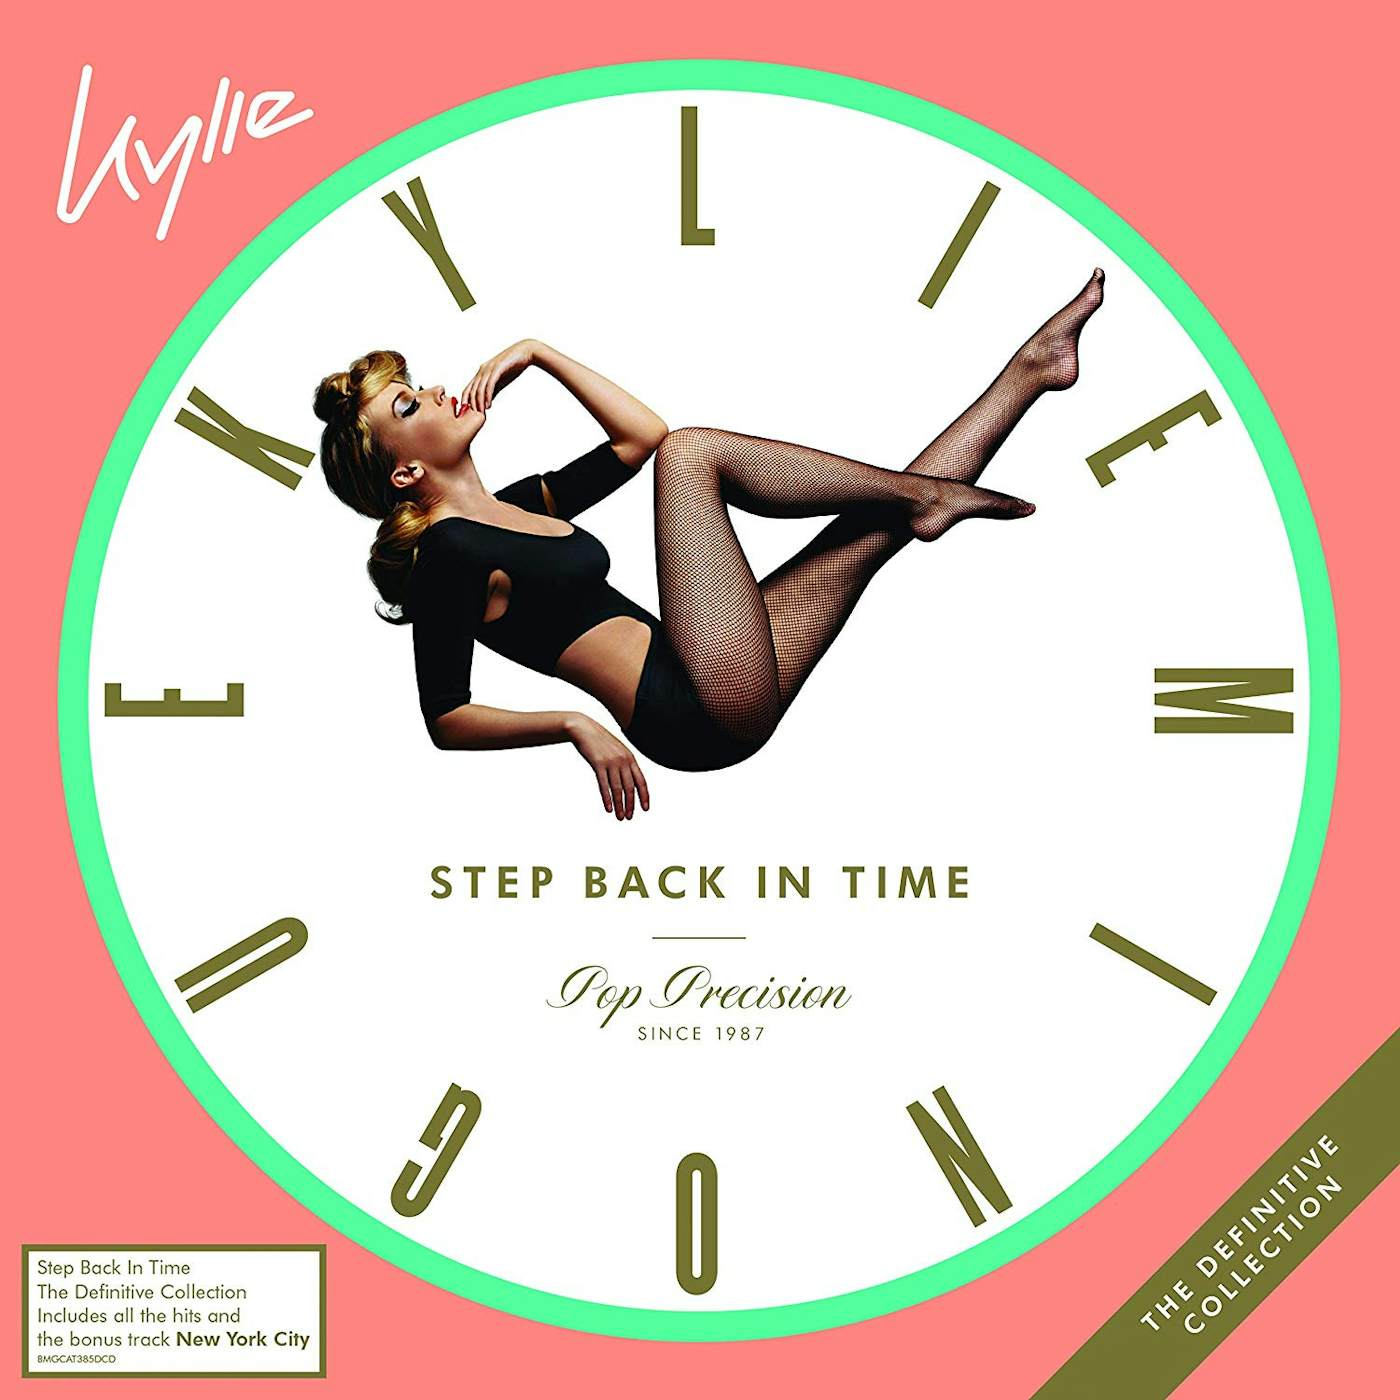 Kylie Minogue STEP BACK IN TIME: THE DEFINITIVE COLLECTION (DELUXE 2CD/BOOK) CD